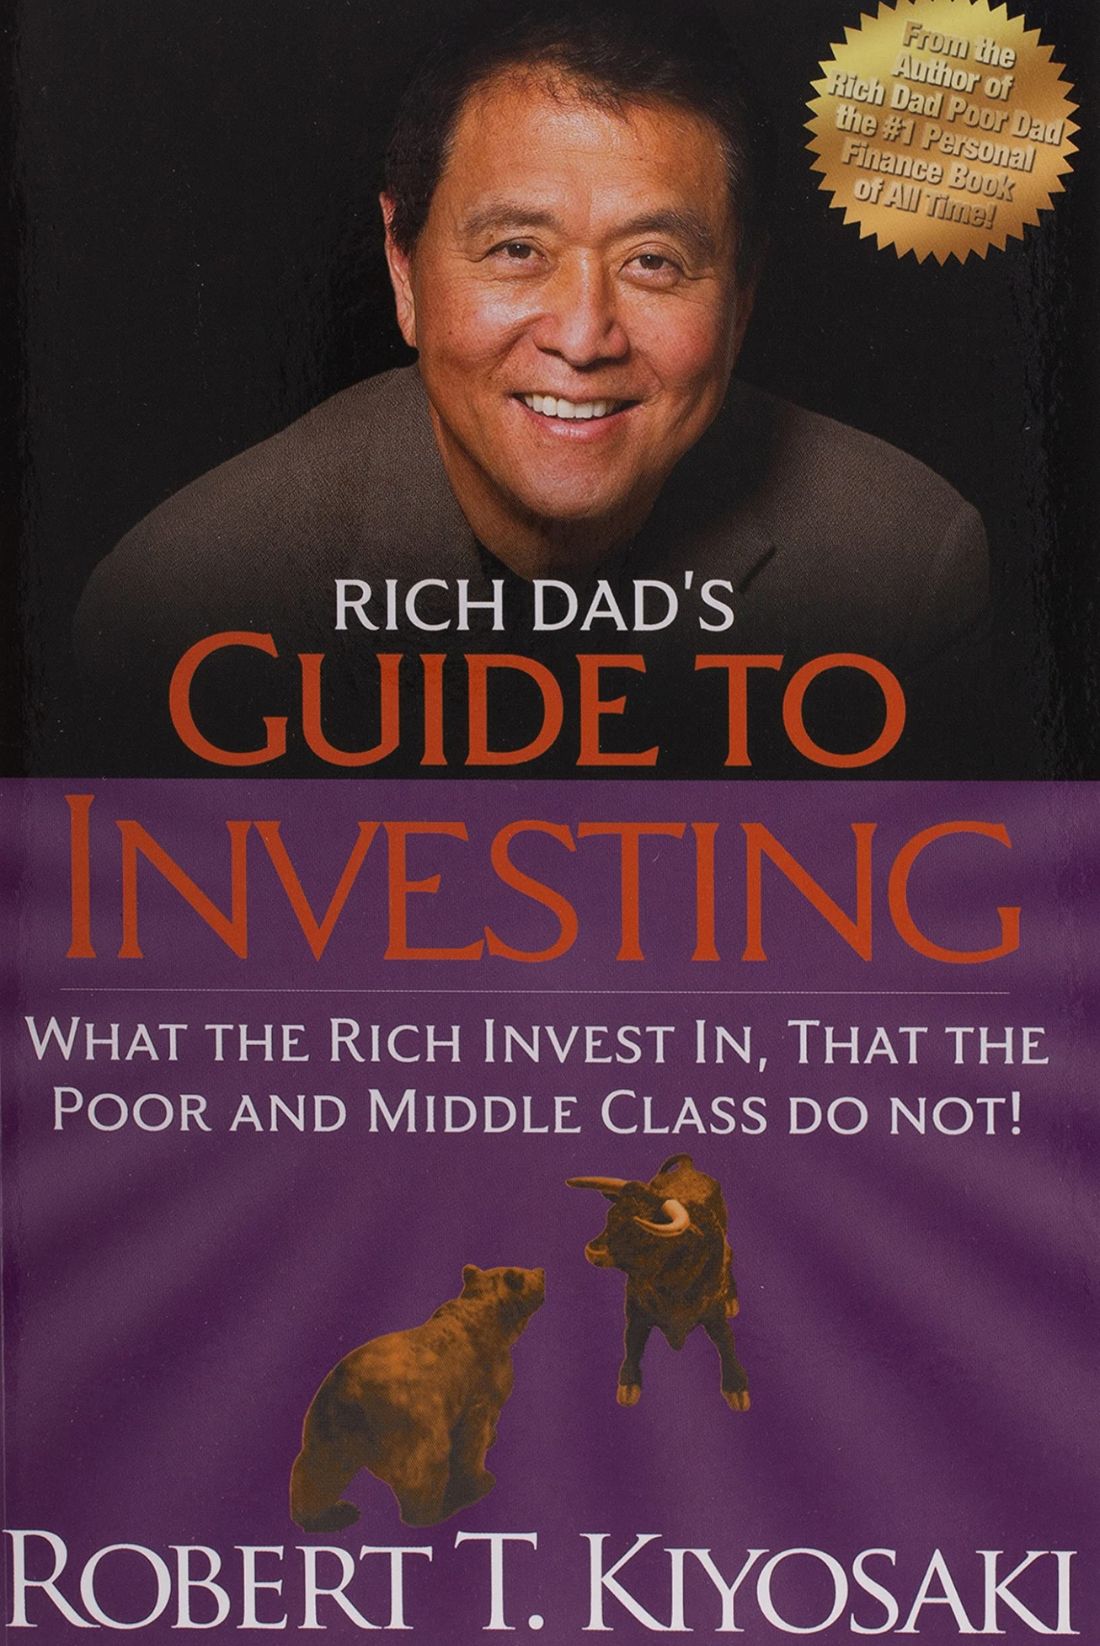 Guide to Investing